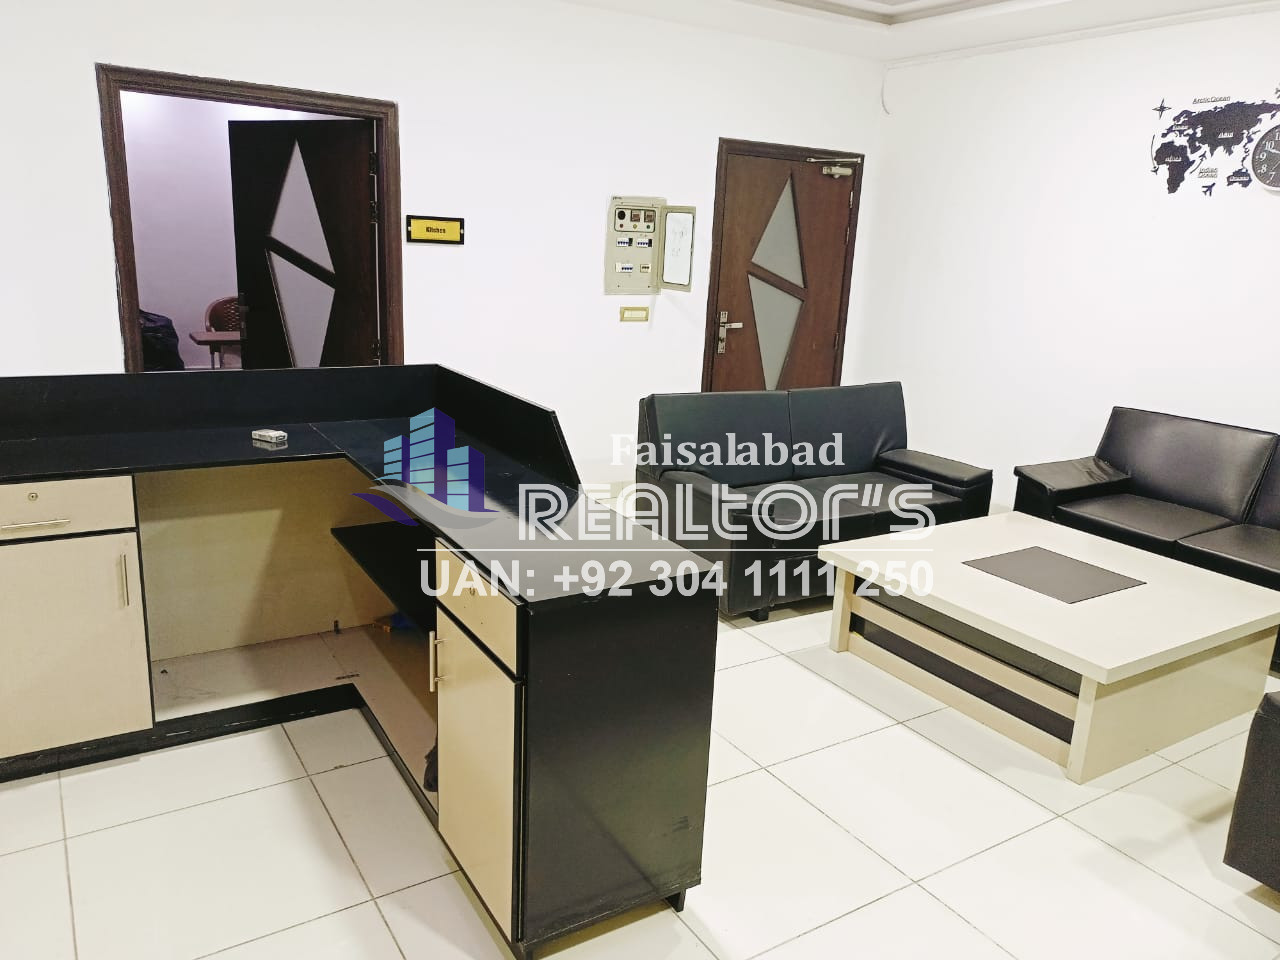 3000 sq ft office for rent in Faisalabad - Commercial Office